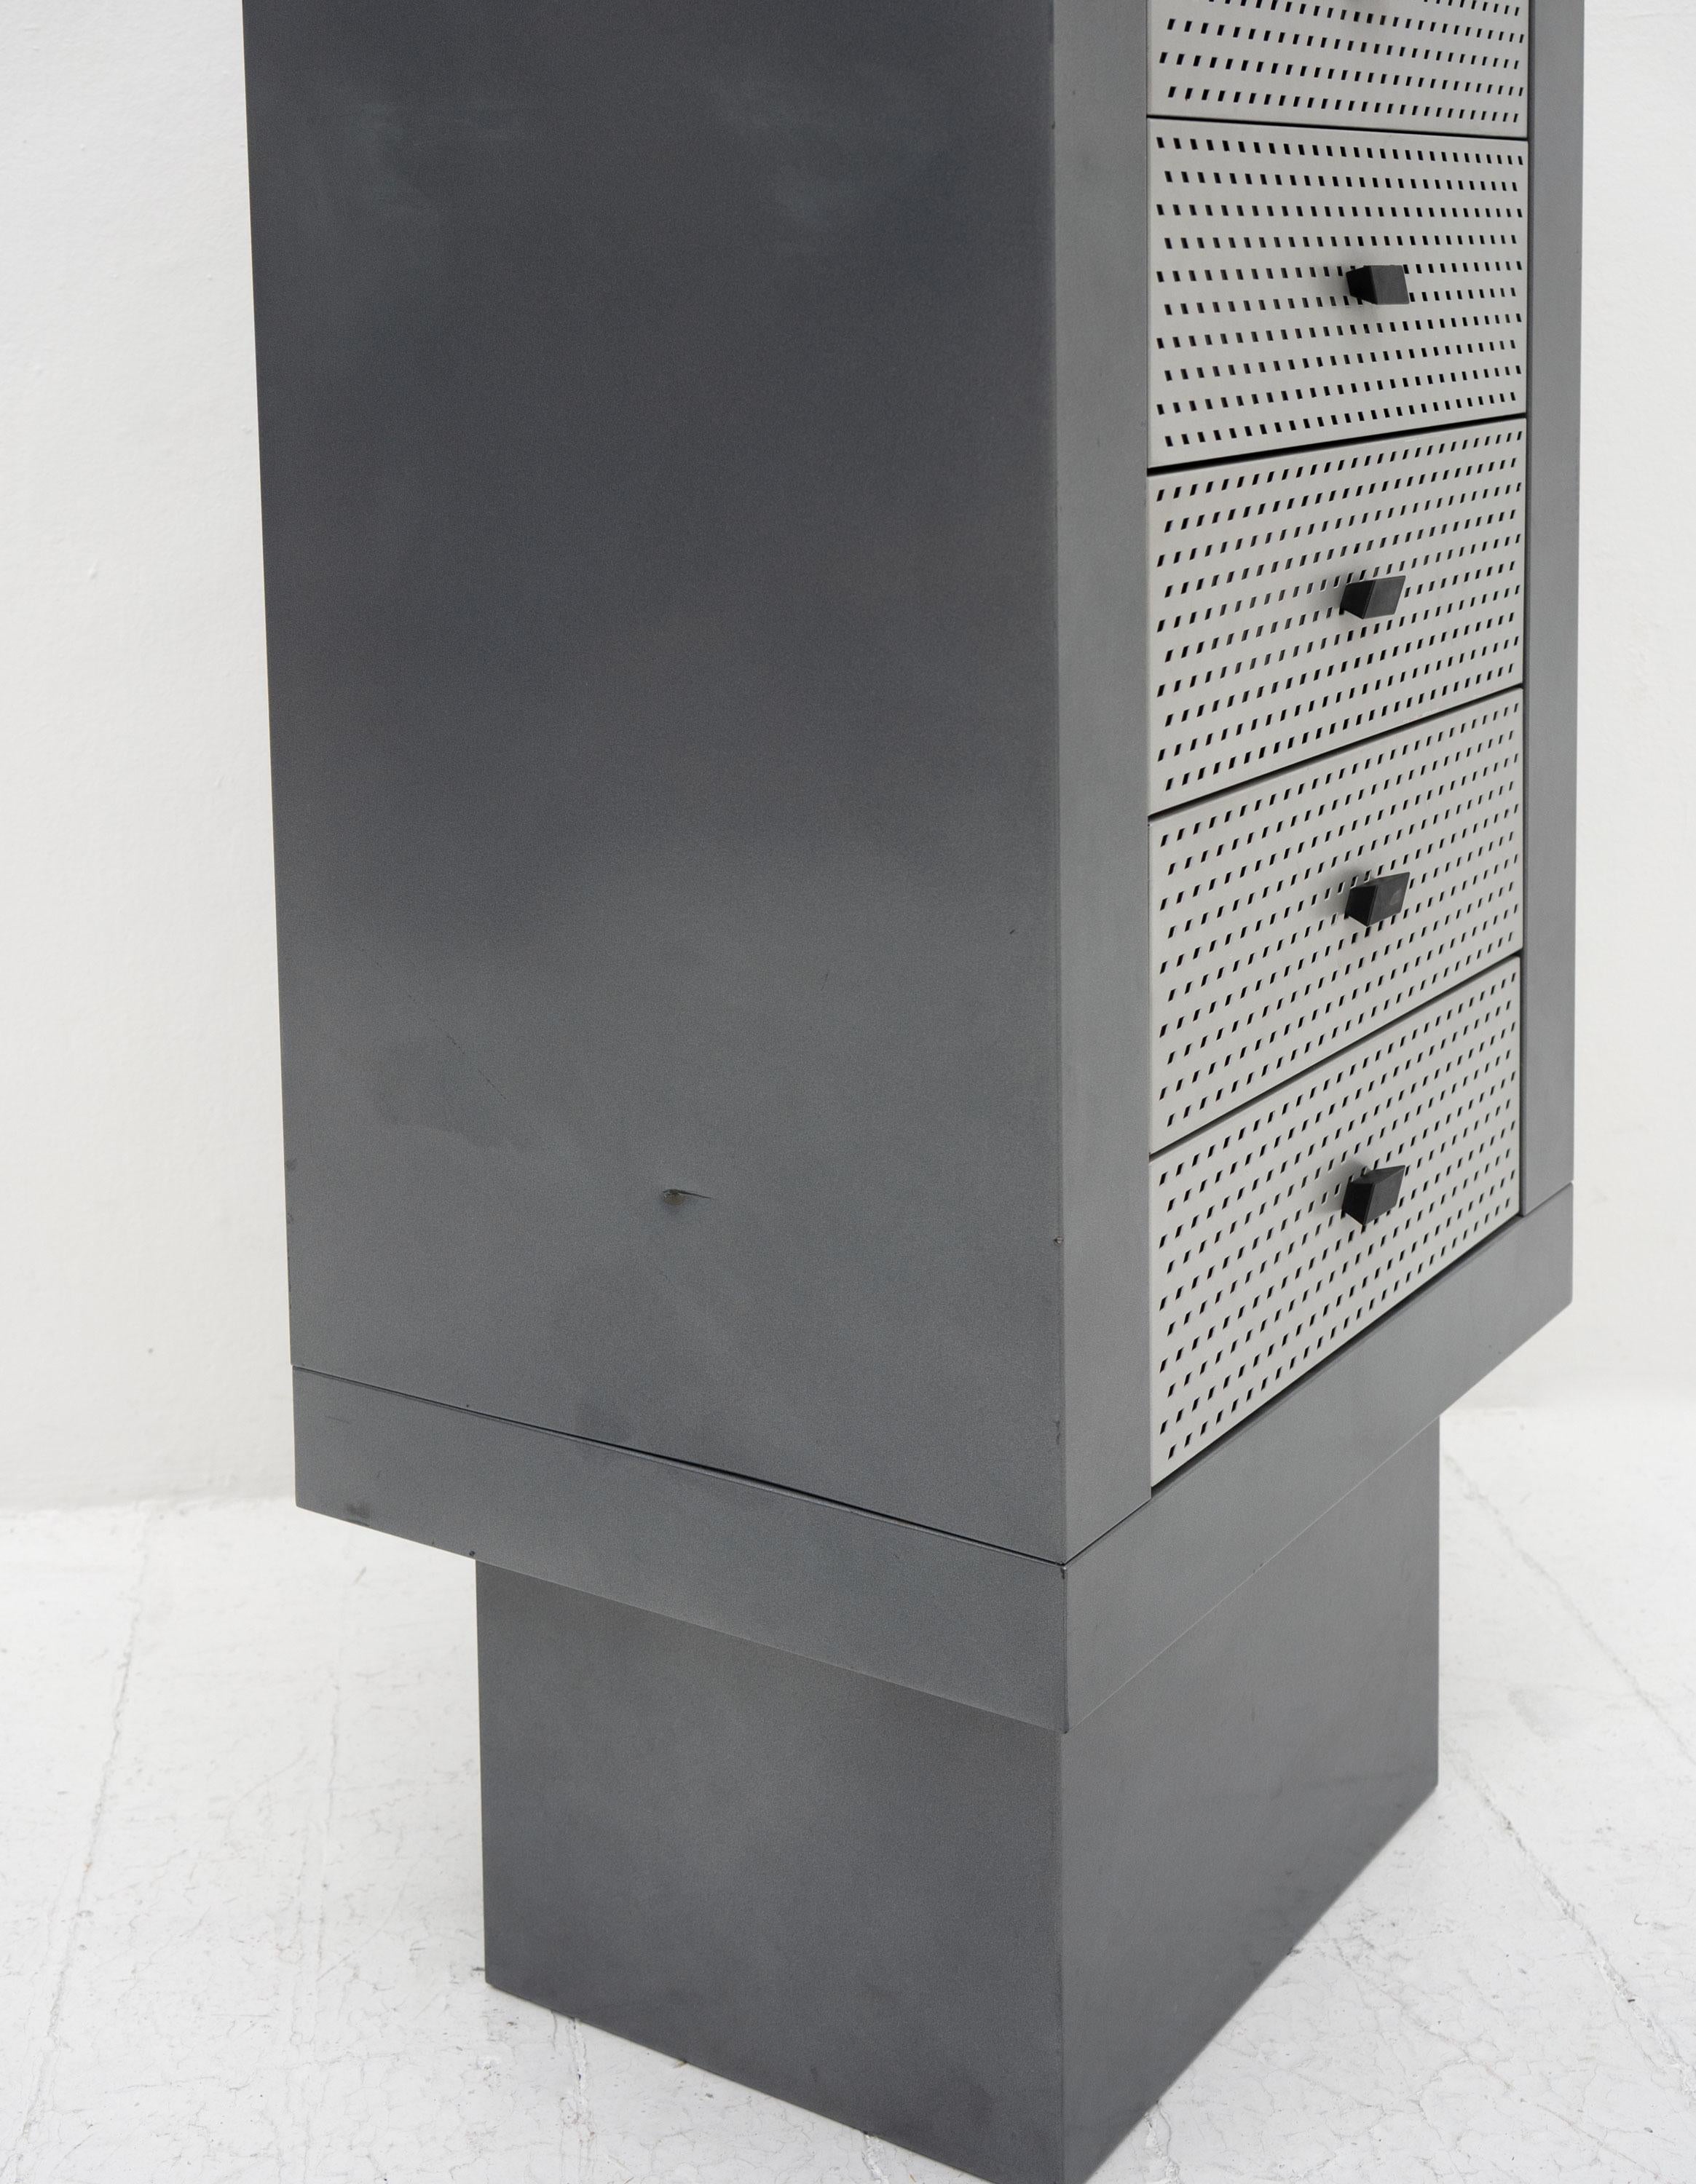 Steel Settimanale Chest of drawers / Tallboy by Matteo Thun for Bieffeplast, 1985 For Sale